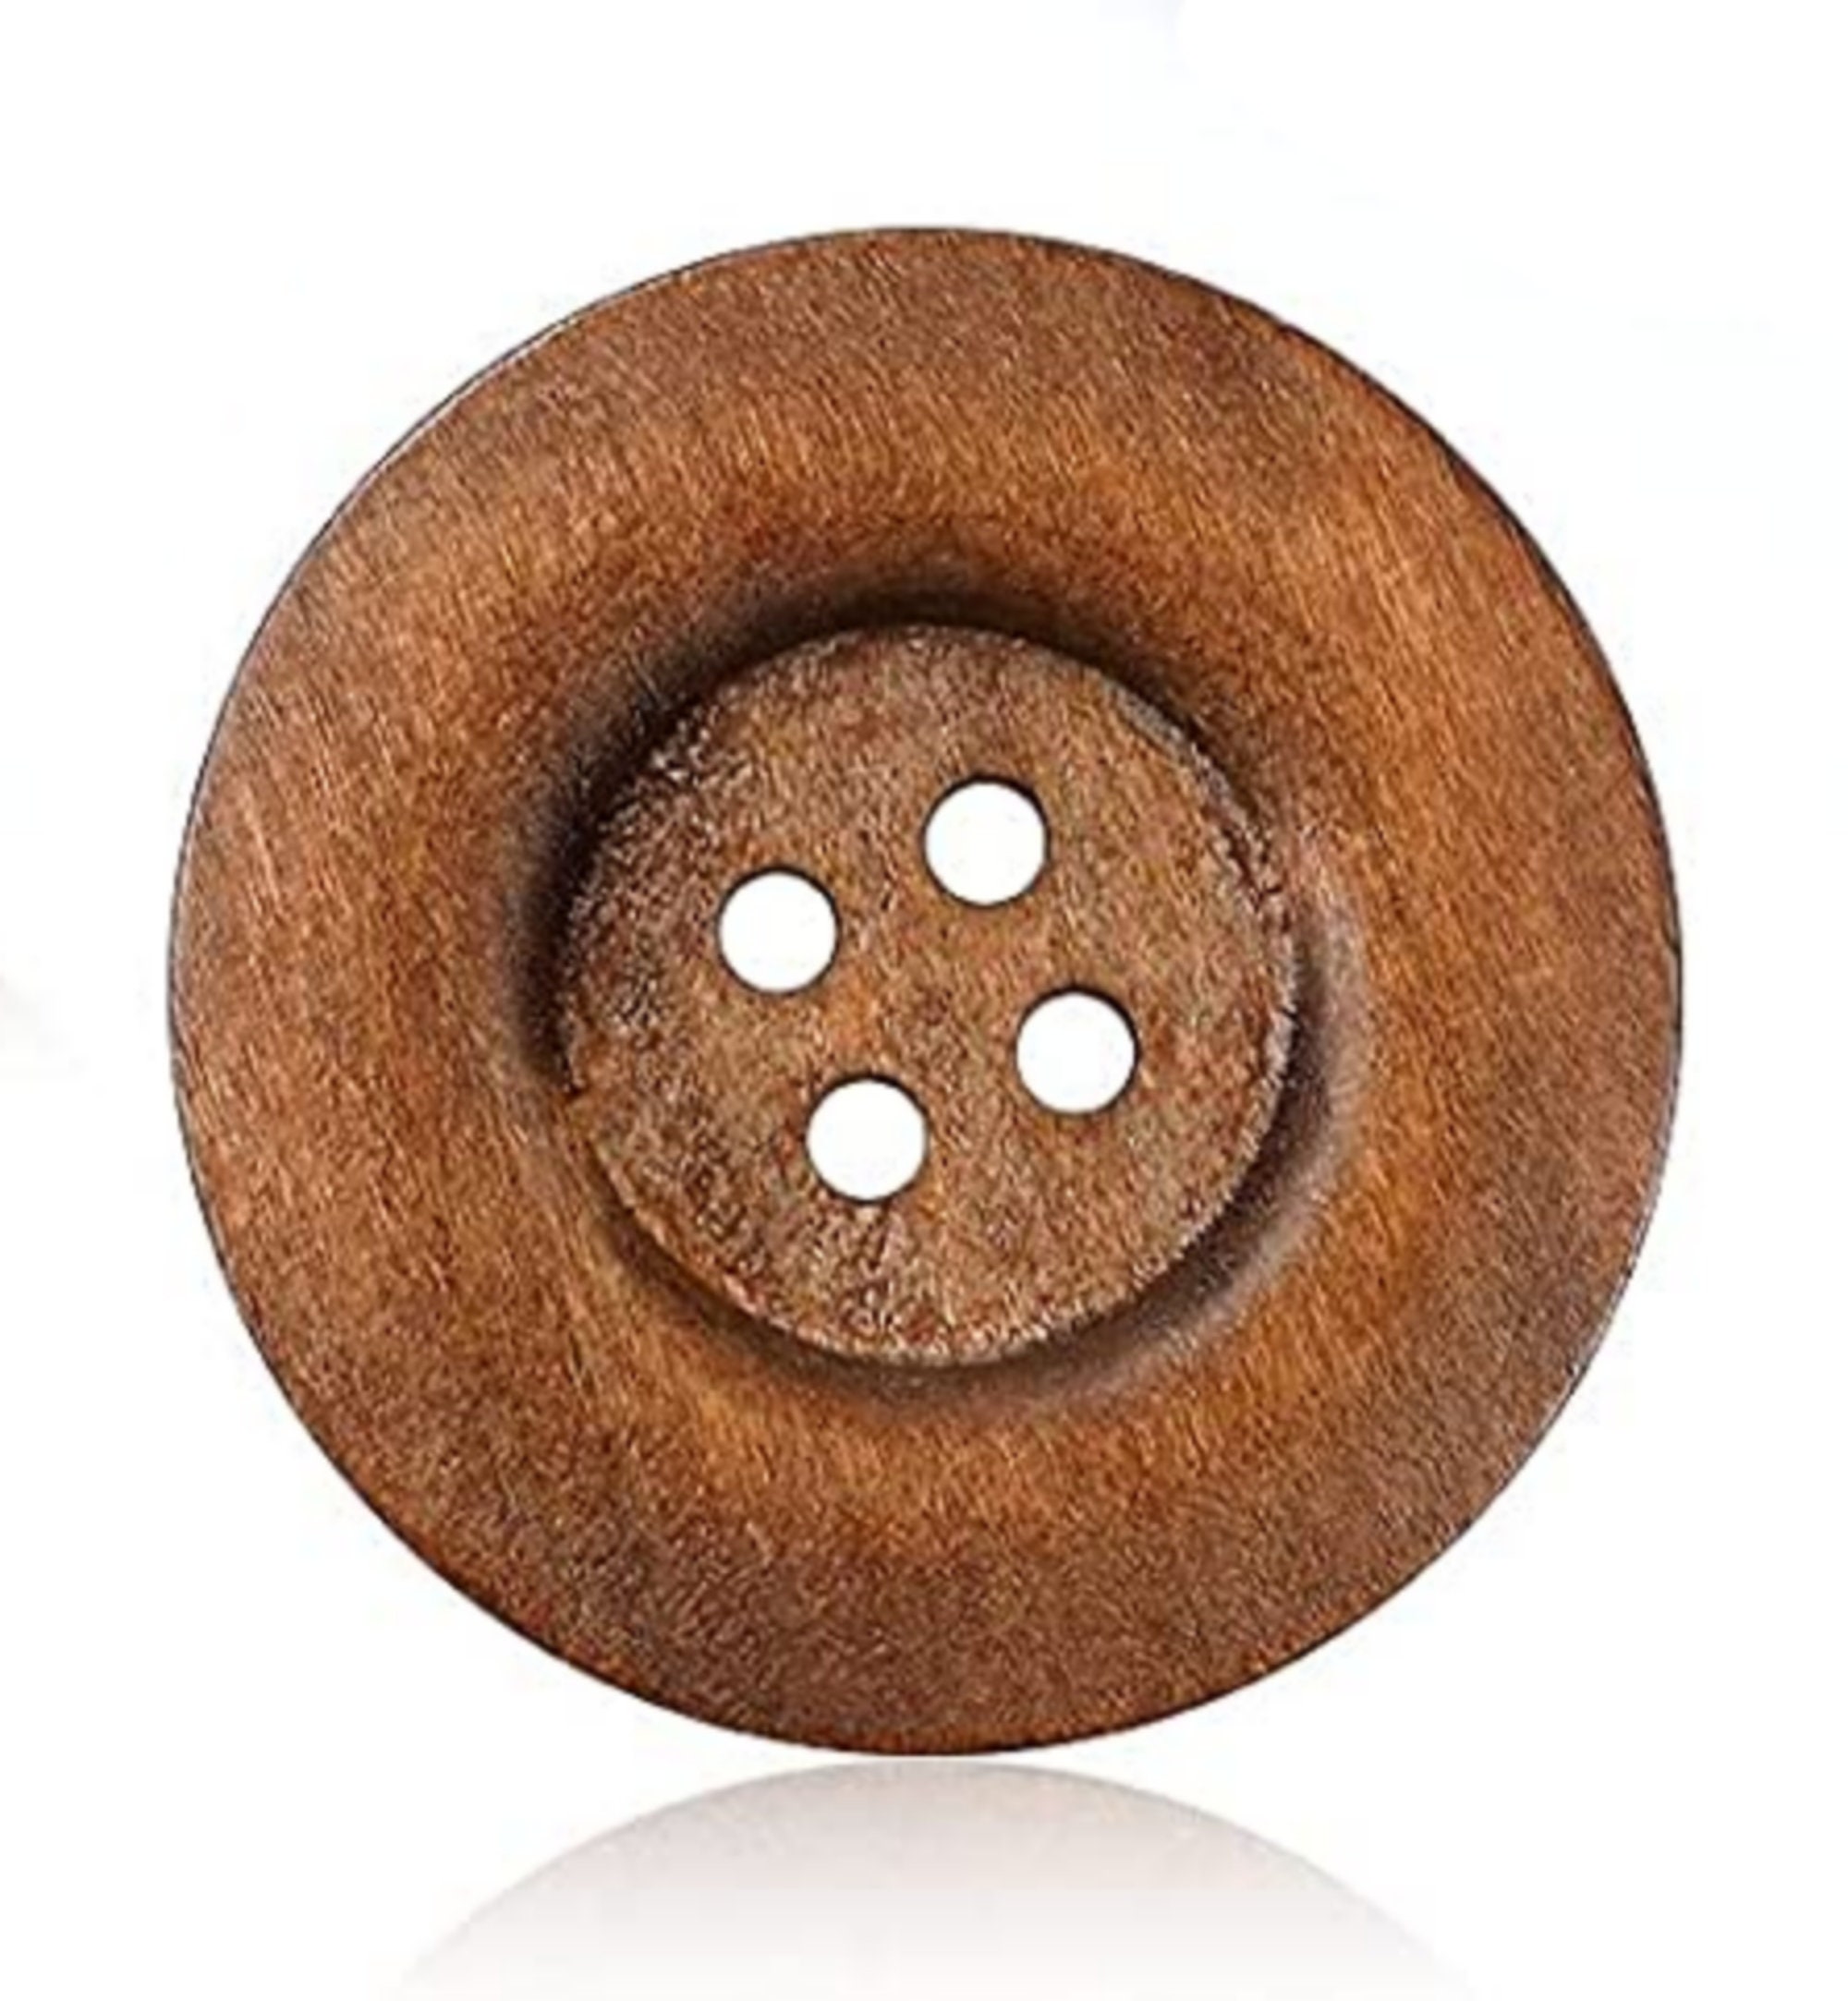 Large Wooden Buttons 5cm, Giant Wooden Buttons, Natural Wood Buttons, Large  Coat Buttons, 2 Inch Buttons, 50mm Buttons, UK Sewing Supplies 